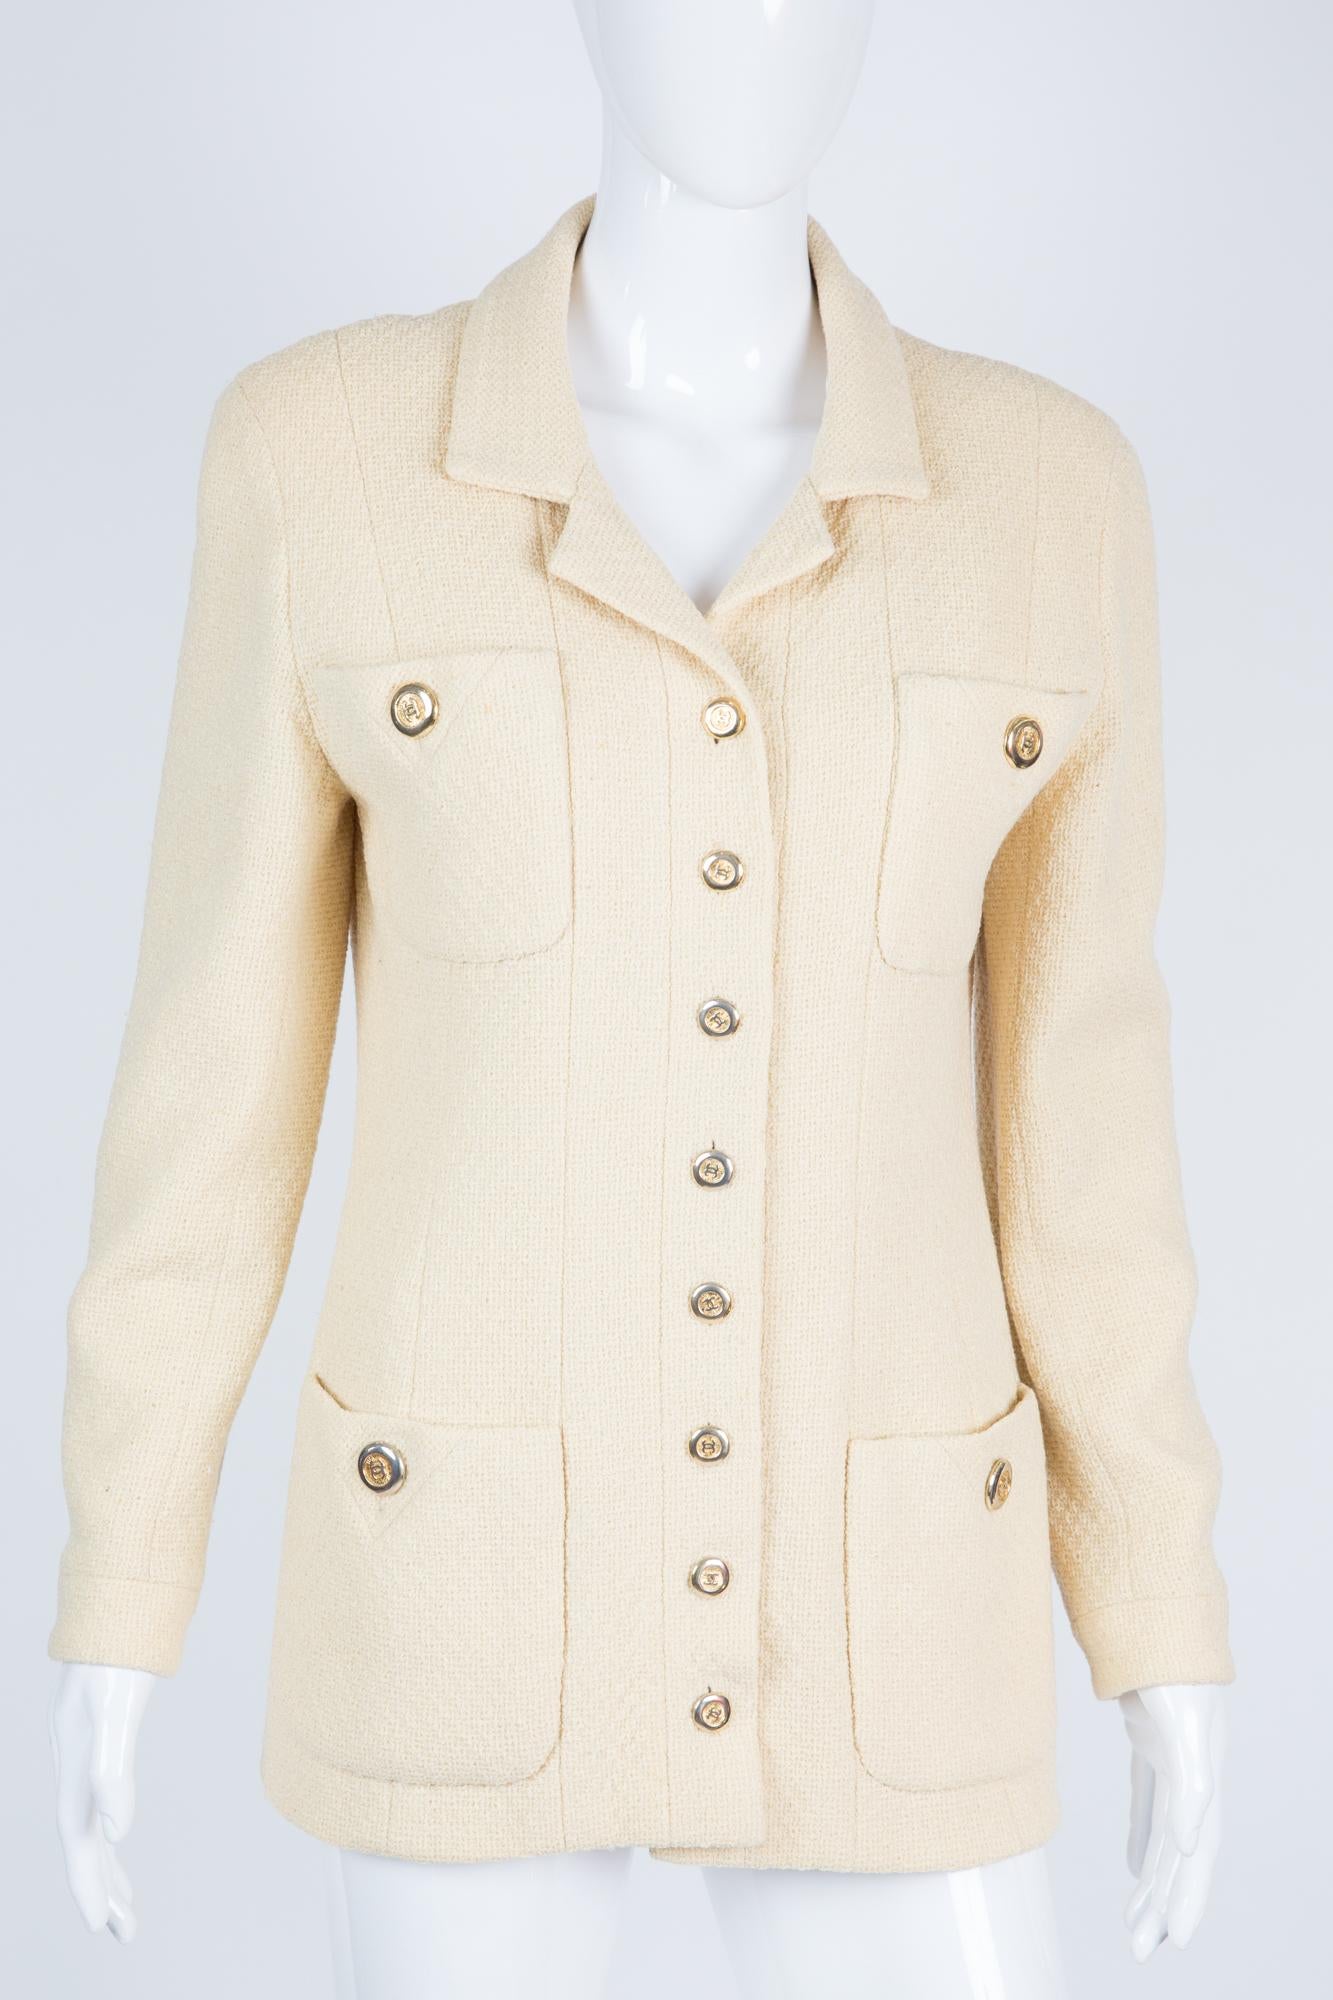 Chanel long ivory wool boucle Chanel jacket featuring a long length,  front logo buttons, long sleeves with logo buttons, a back slit with logo buttons, a silk logo lining , and a 24kt gilded gold hardware chain in the bottom lining.
Composition: